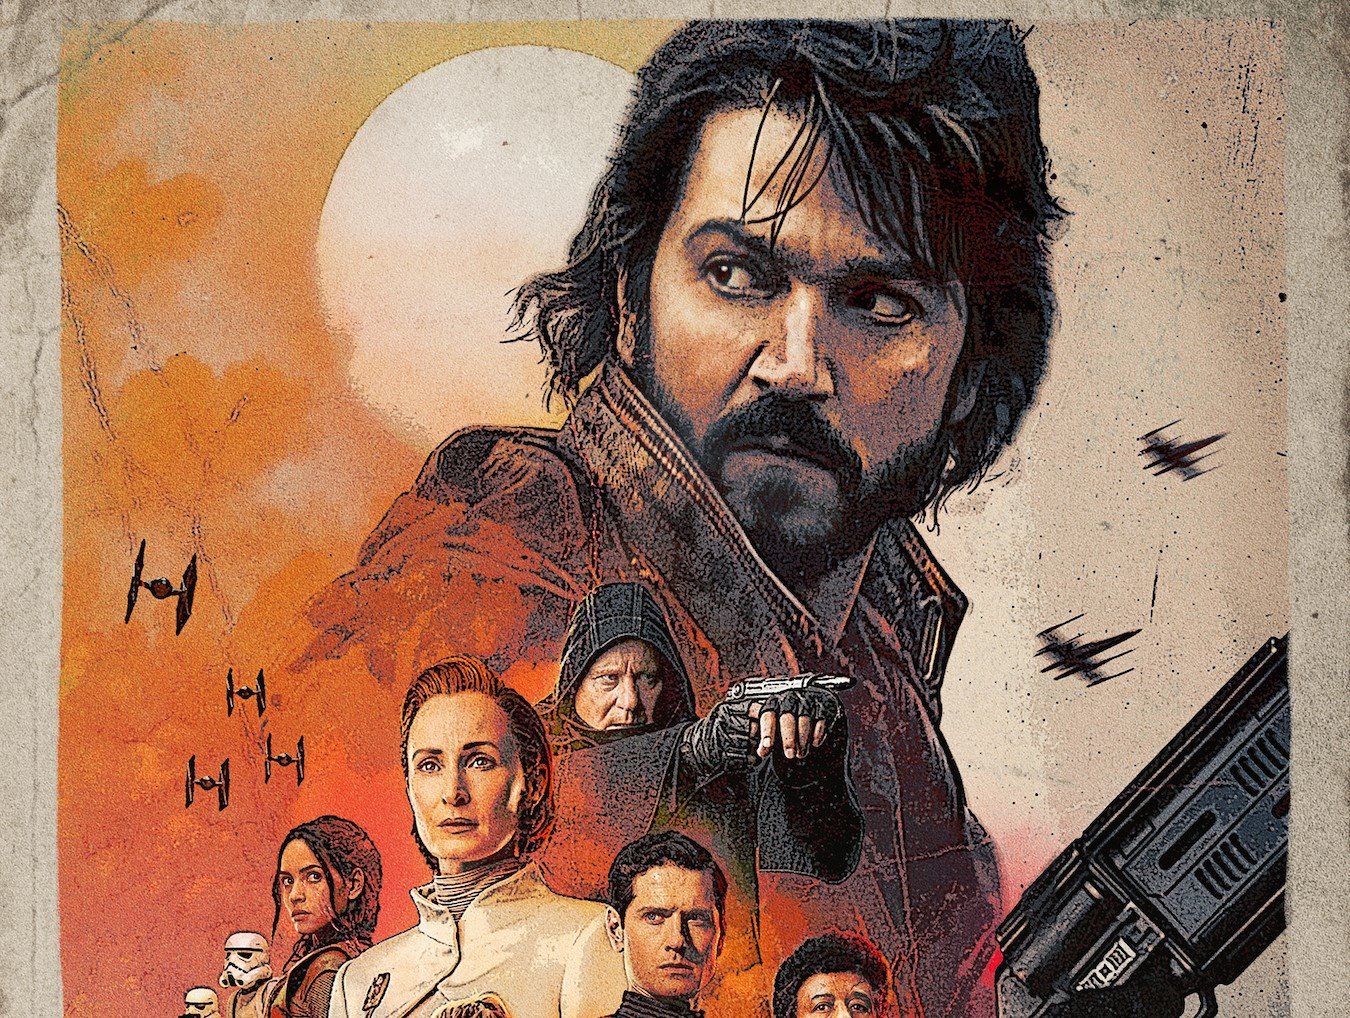 Key art for 'Andor' for our article about the best episode of its premiere. It features Diego Luna as Cassian Andor at the top and the supporting cast below him. The background is orange and white and features a moon.